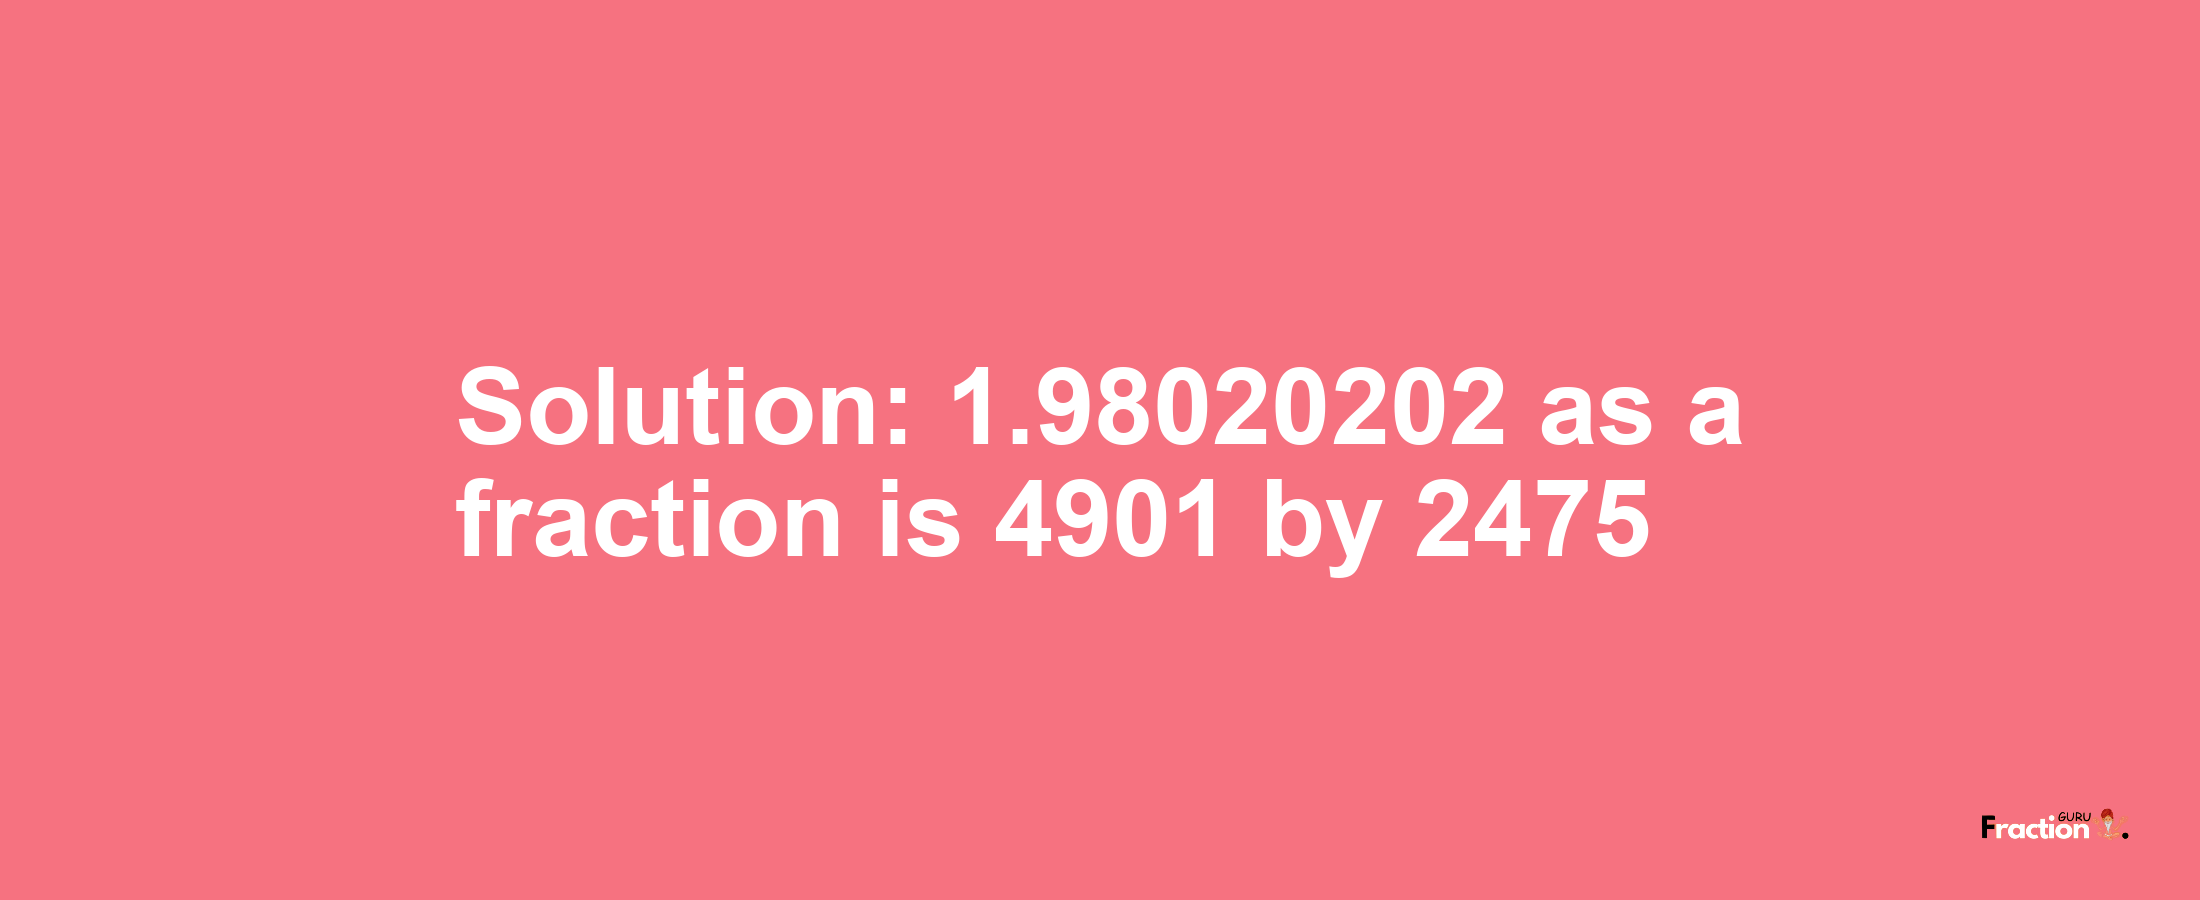 Solution:1.98020202 as a fraction is 4901/2475